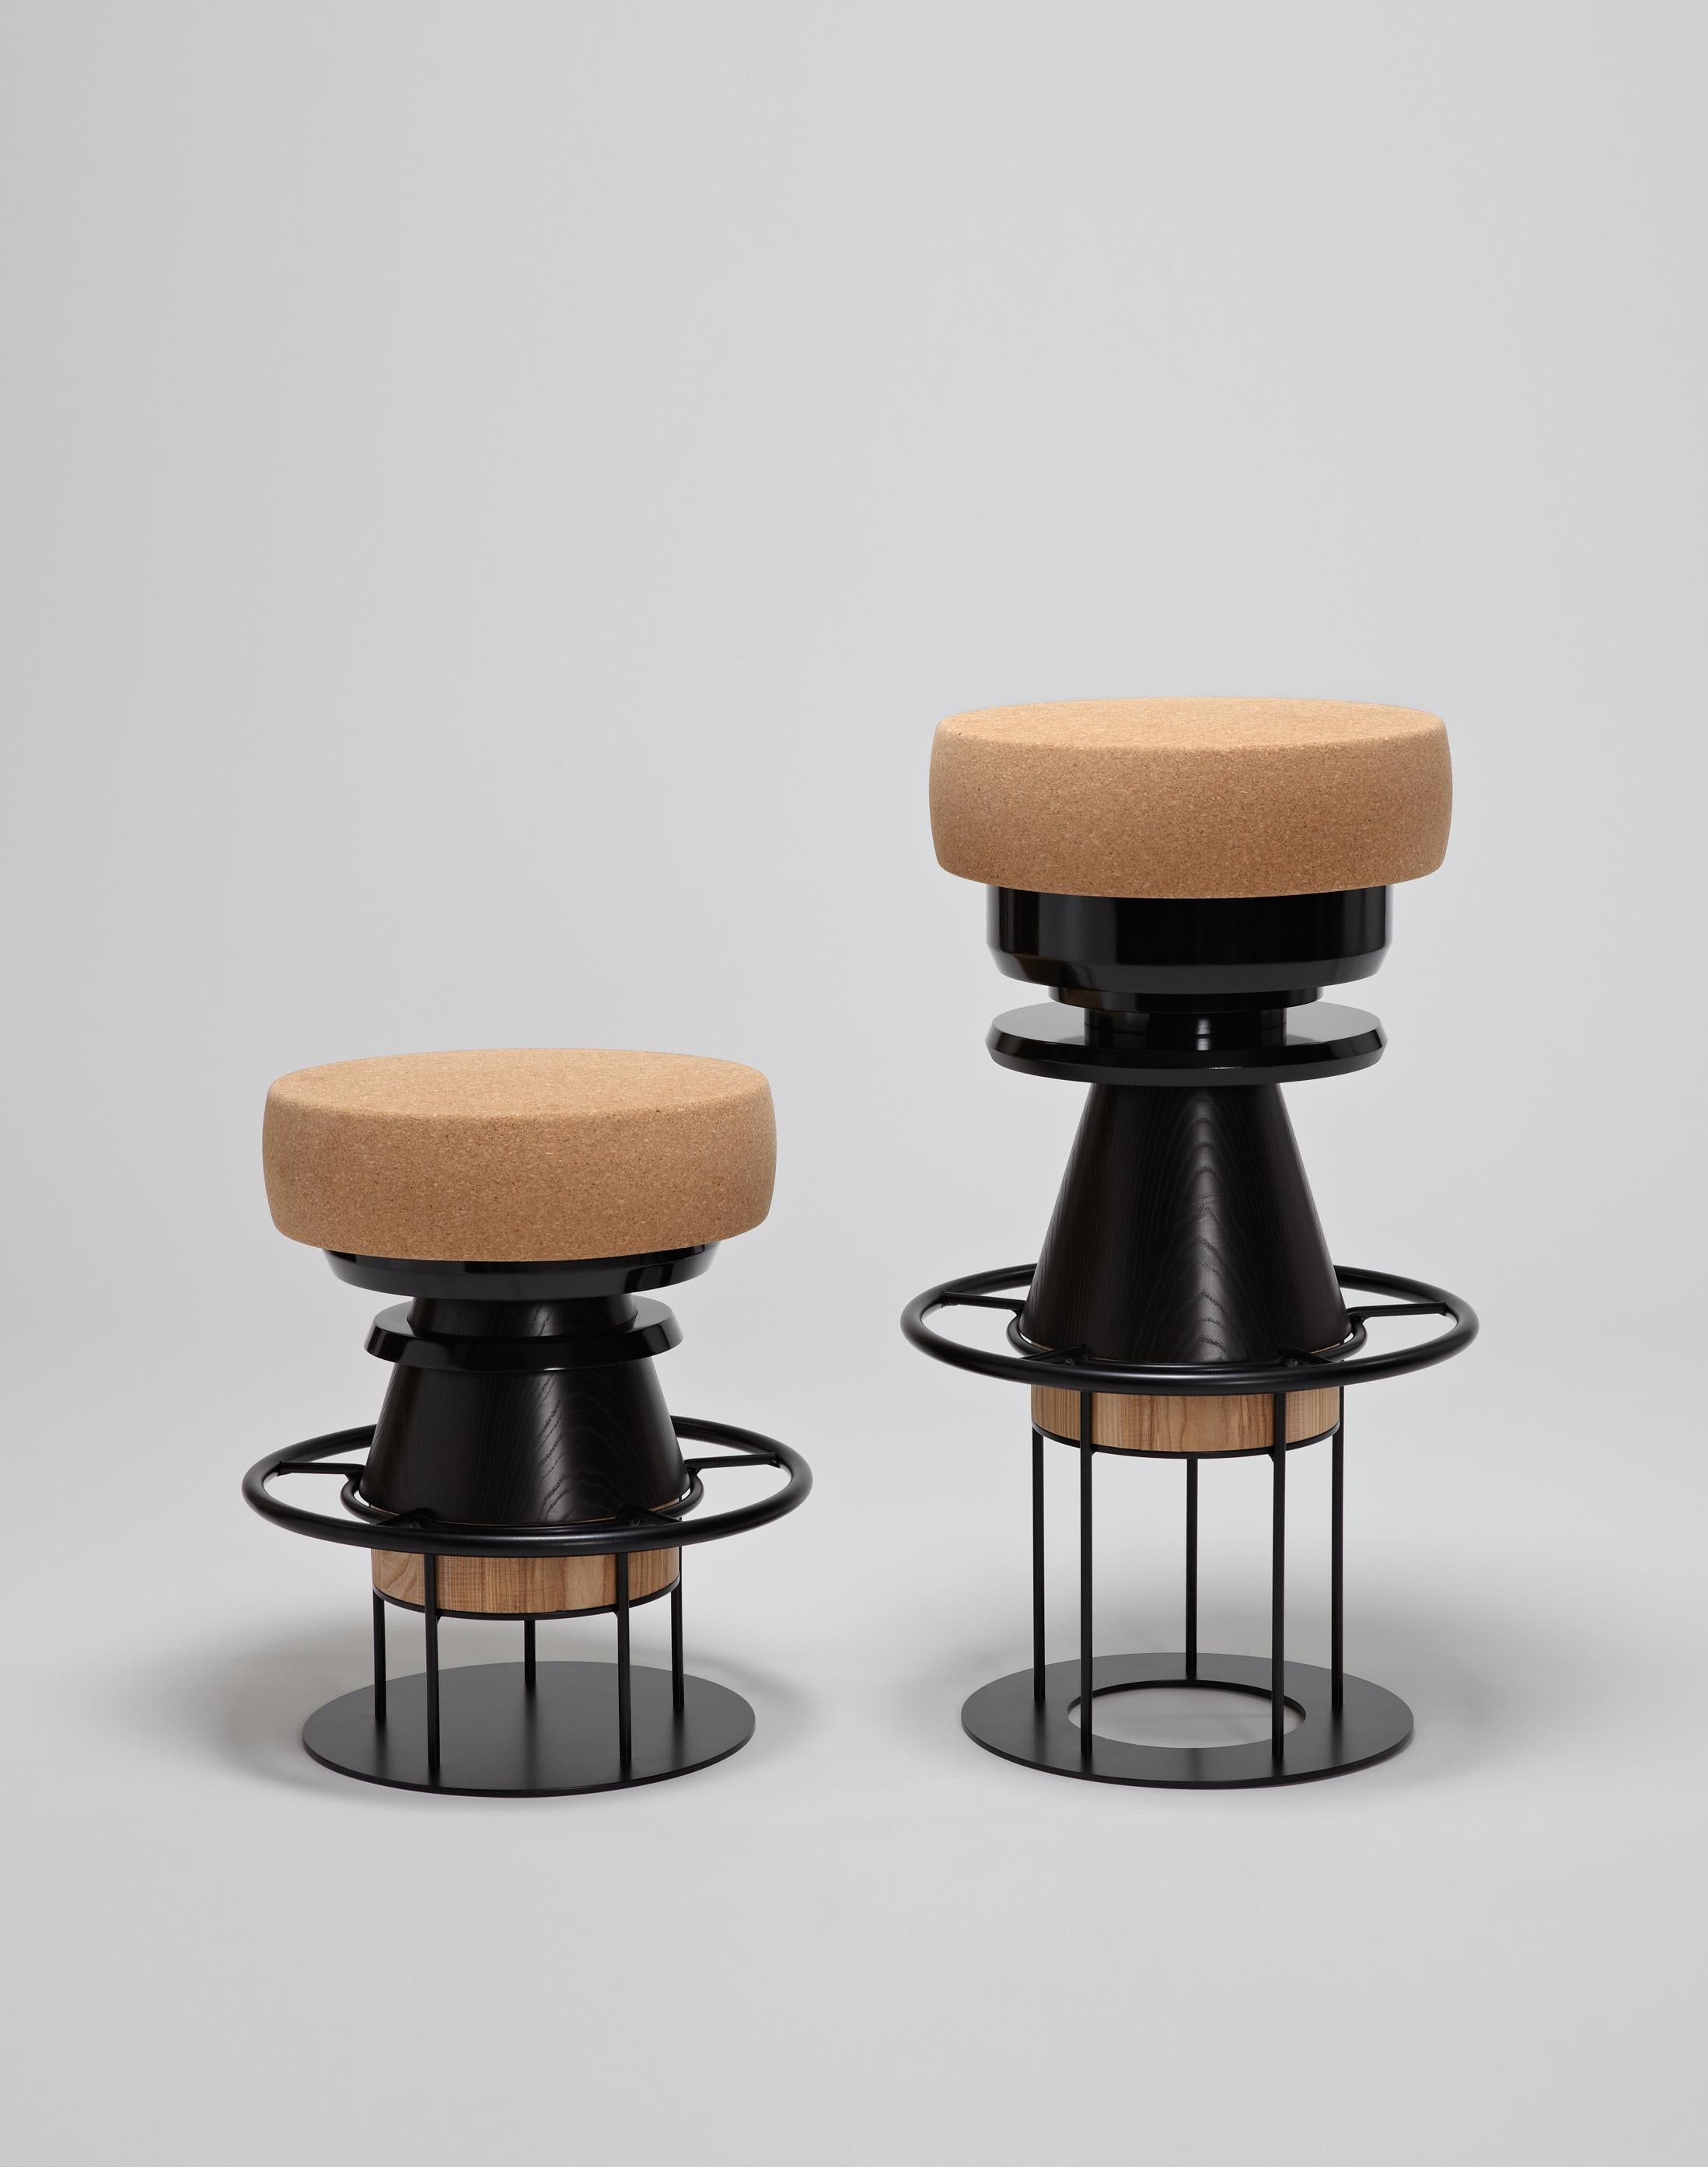 Steel High Colorful Tembo Stool, Note Design Studio For Sale